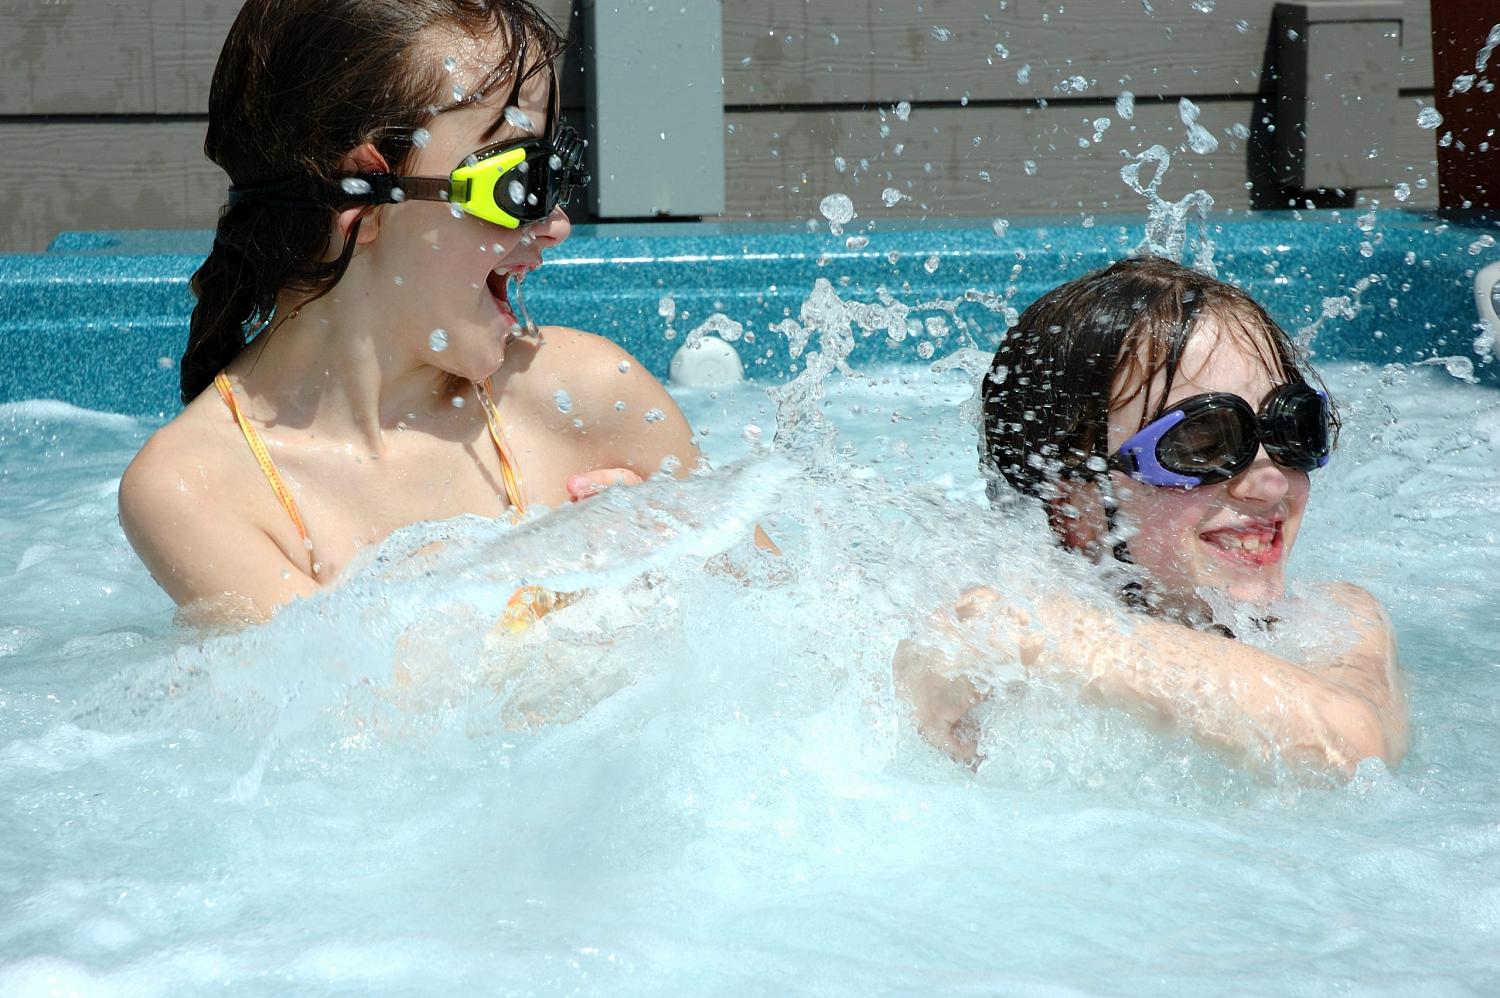 6 hot tub toys you need to try for family fun